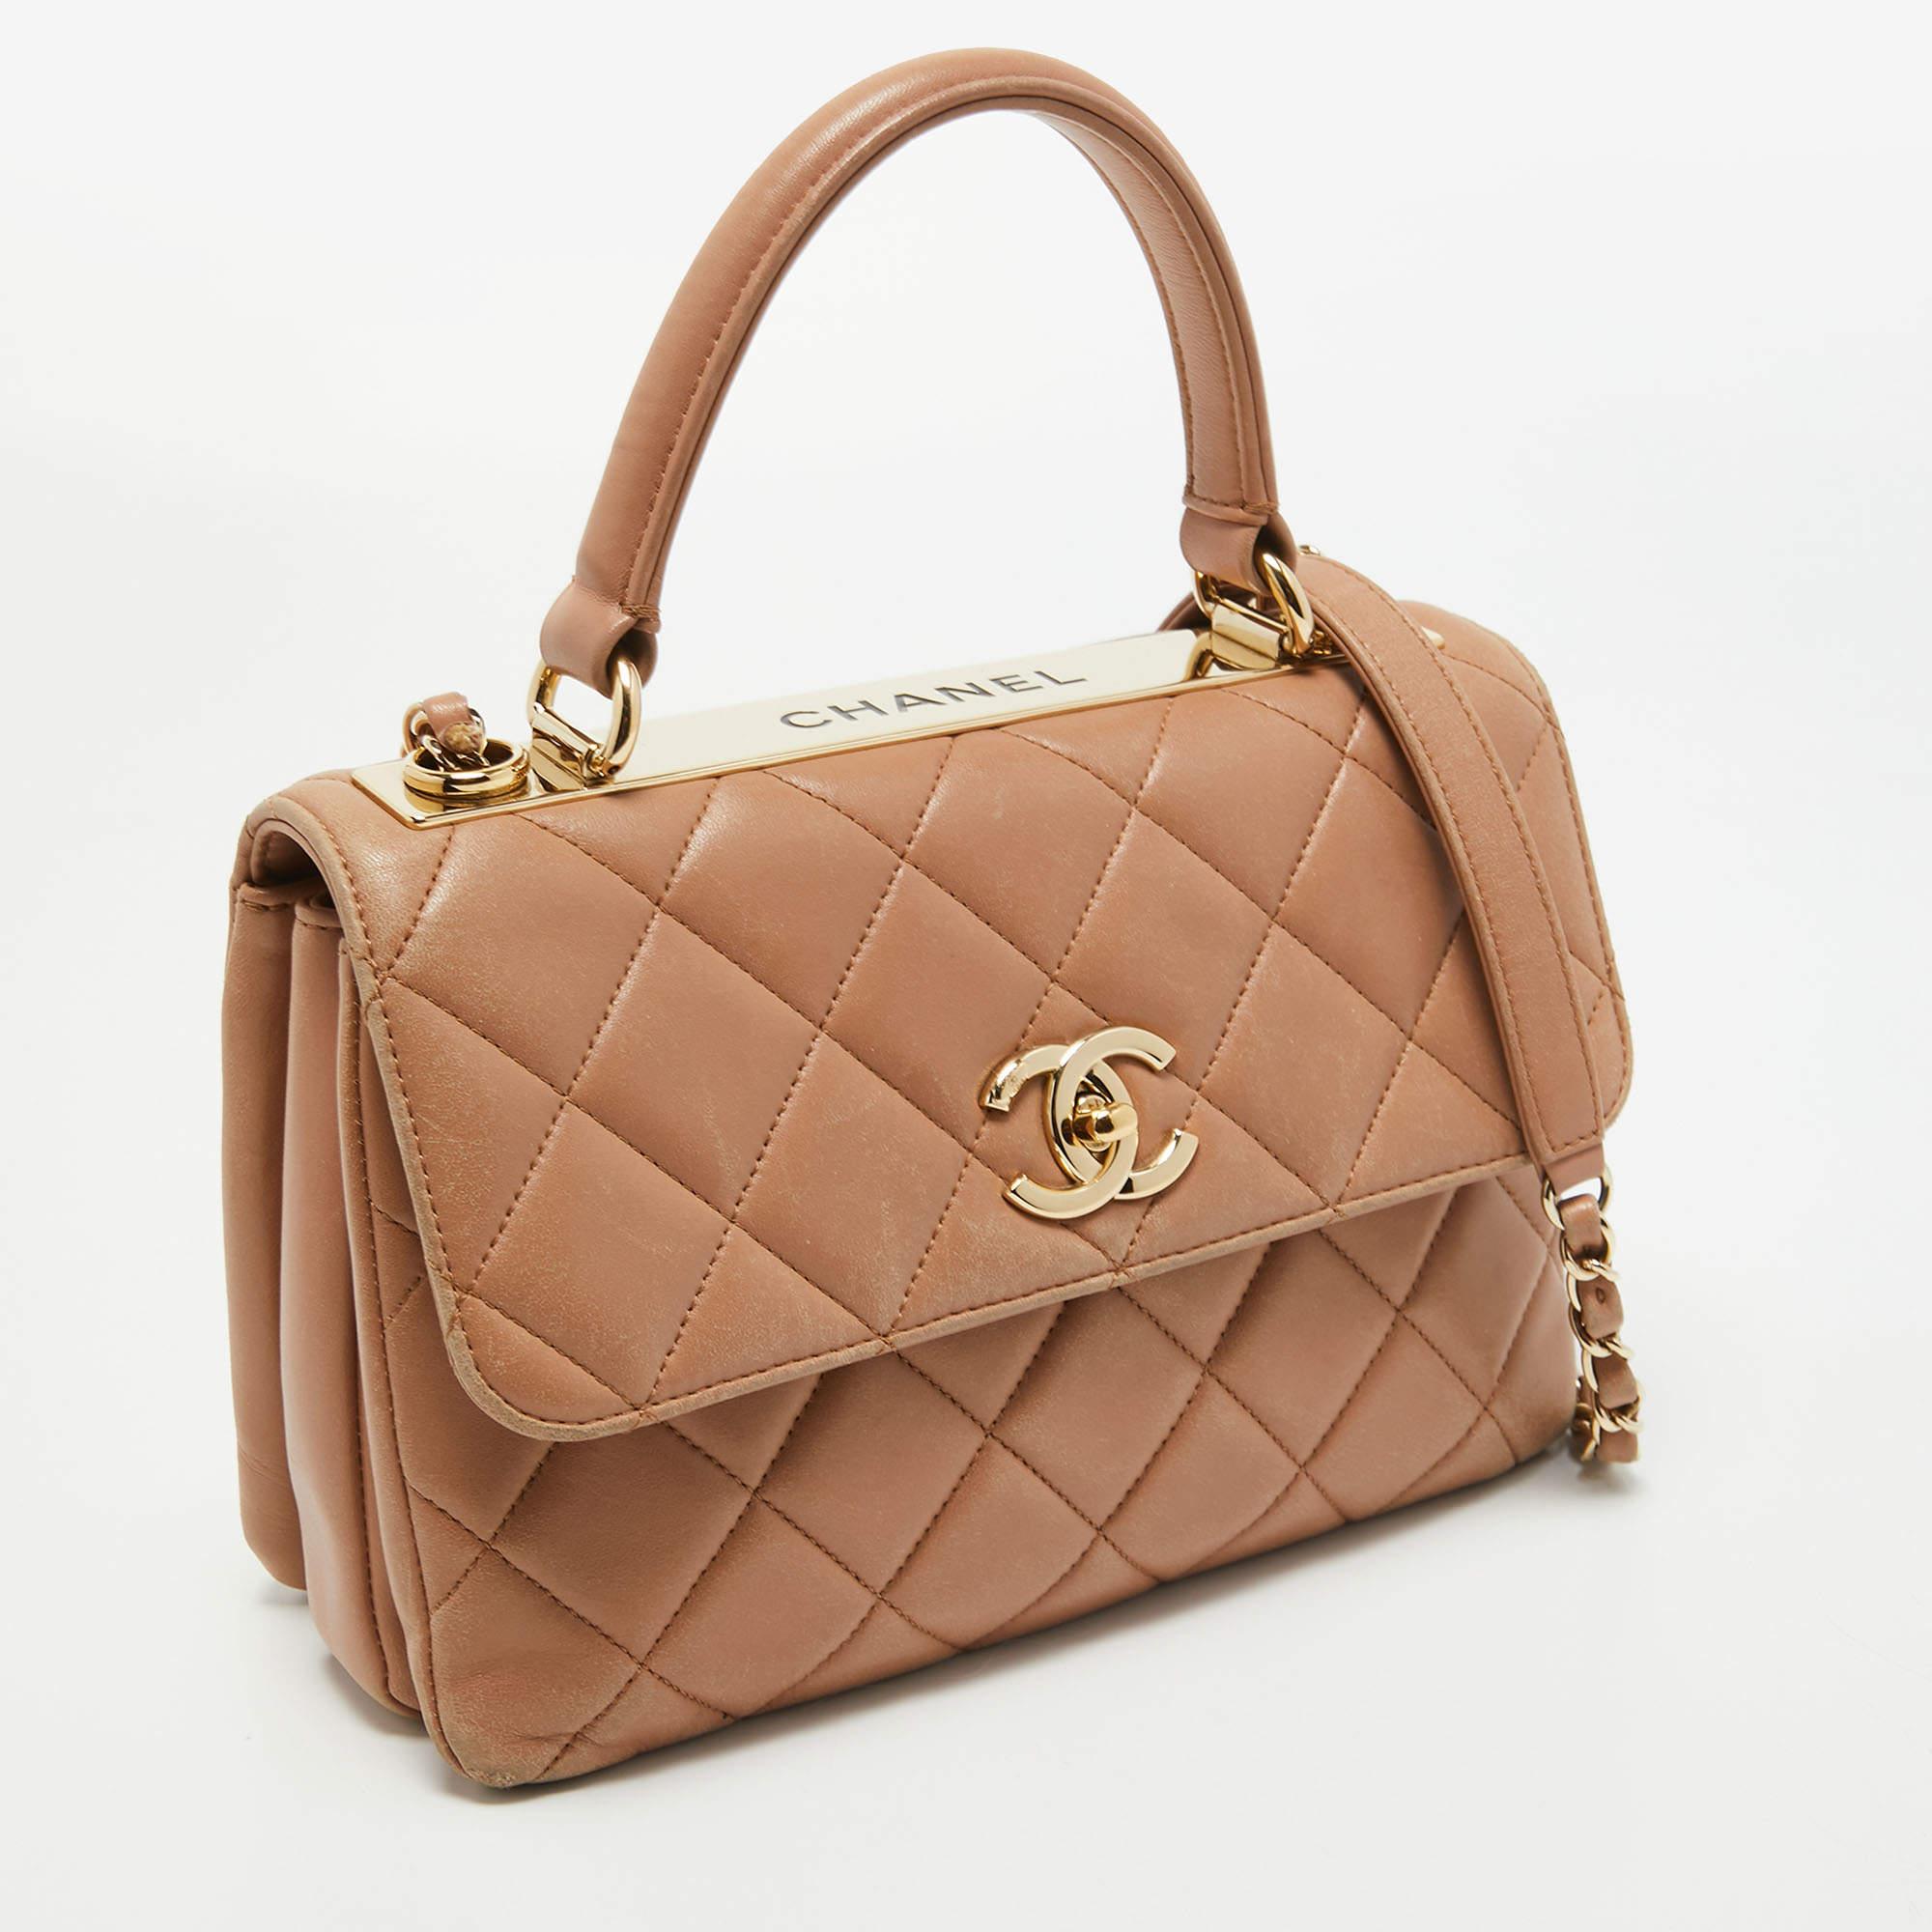 Chanel Beige Quilted Leather Small Trendy CC Flap Top Handle Bag 1